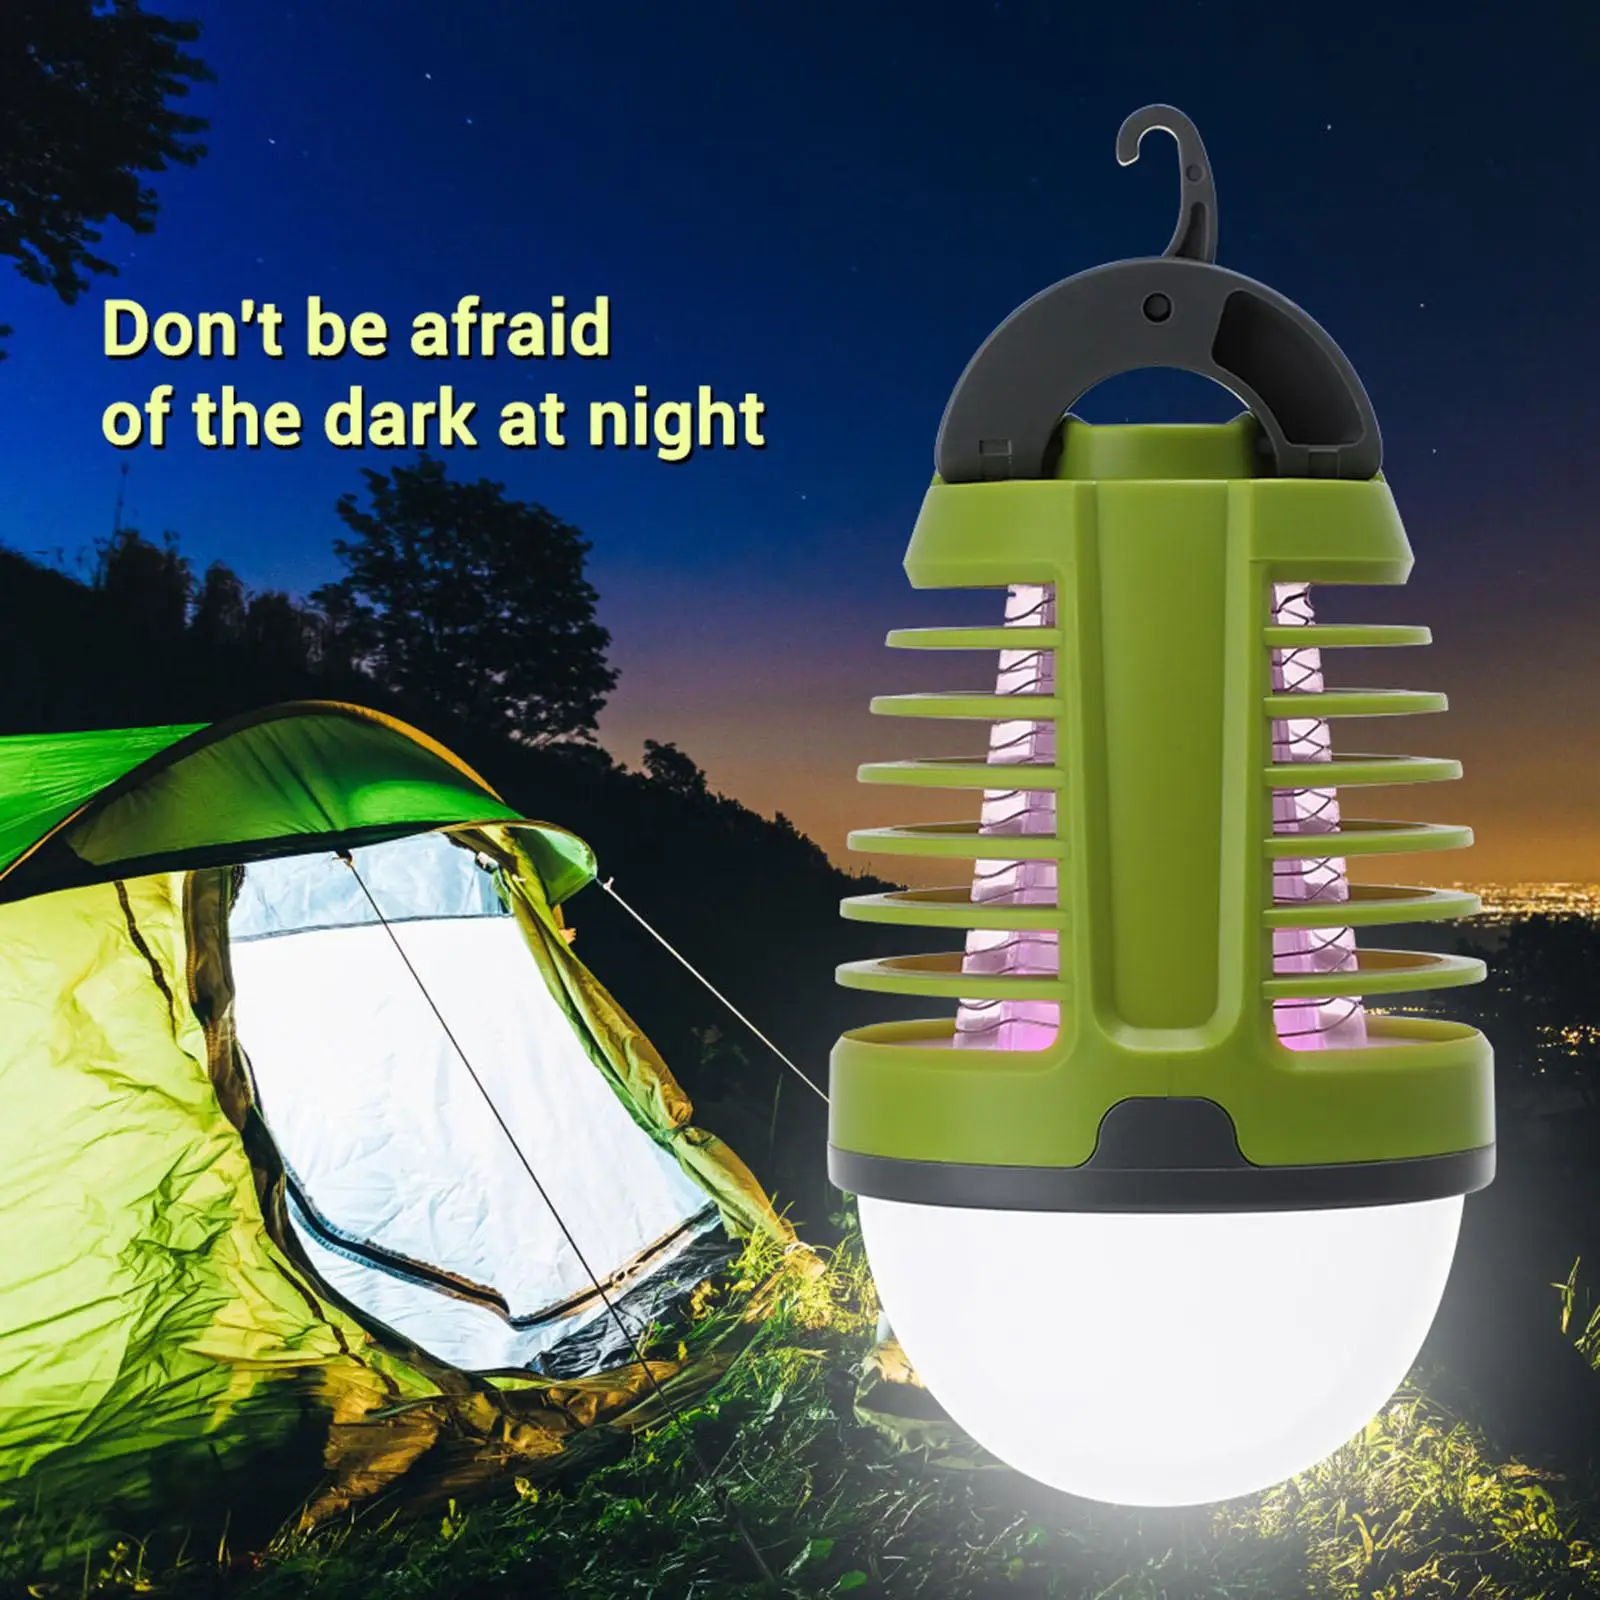 Electric Mosquito Killer Lamp, Killer Trap Insects Trap USB Bug Zapper Hanging Kill Fly Bug Zapper for Bedroom Home Garden